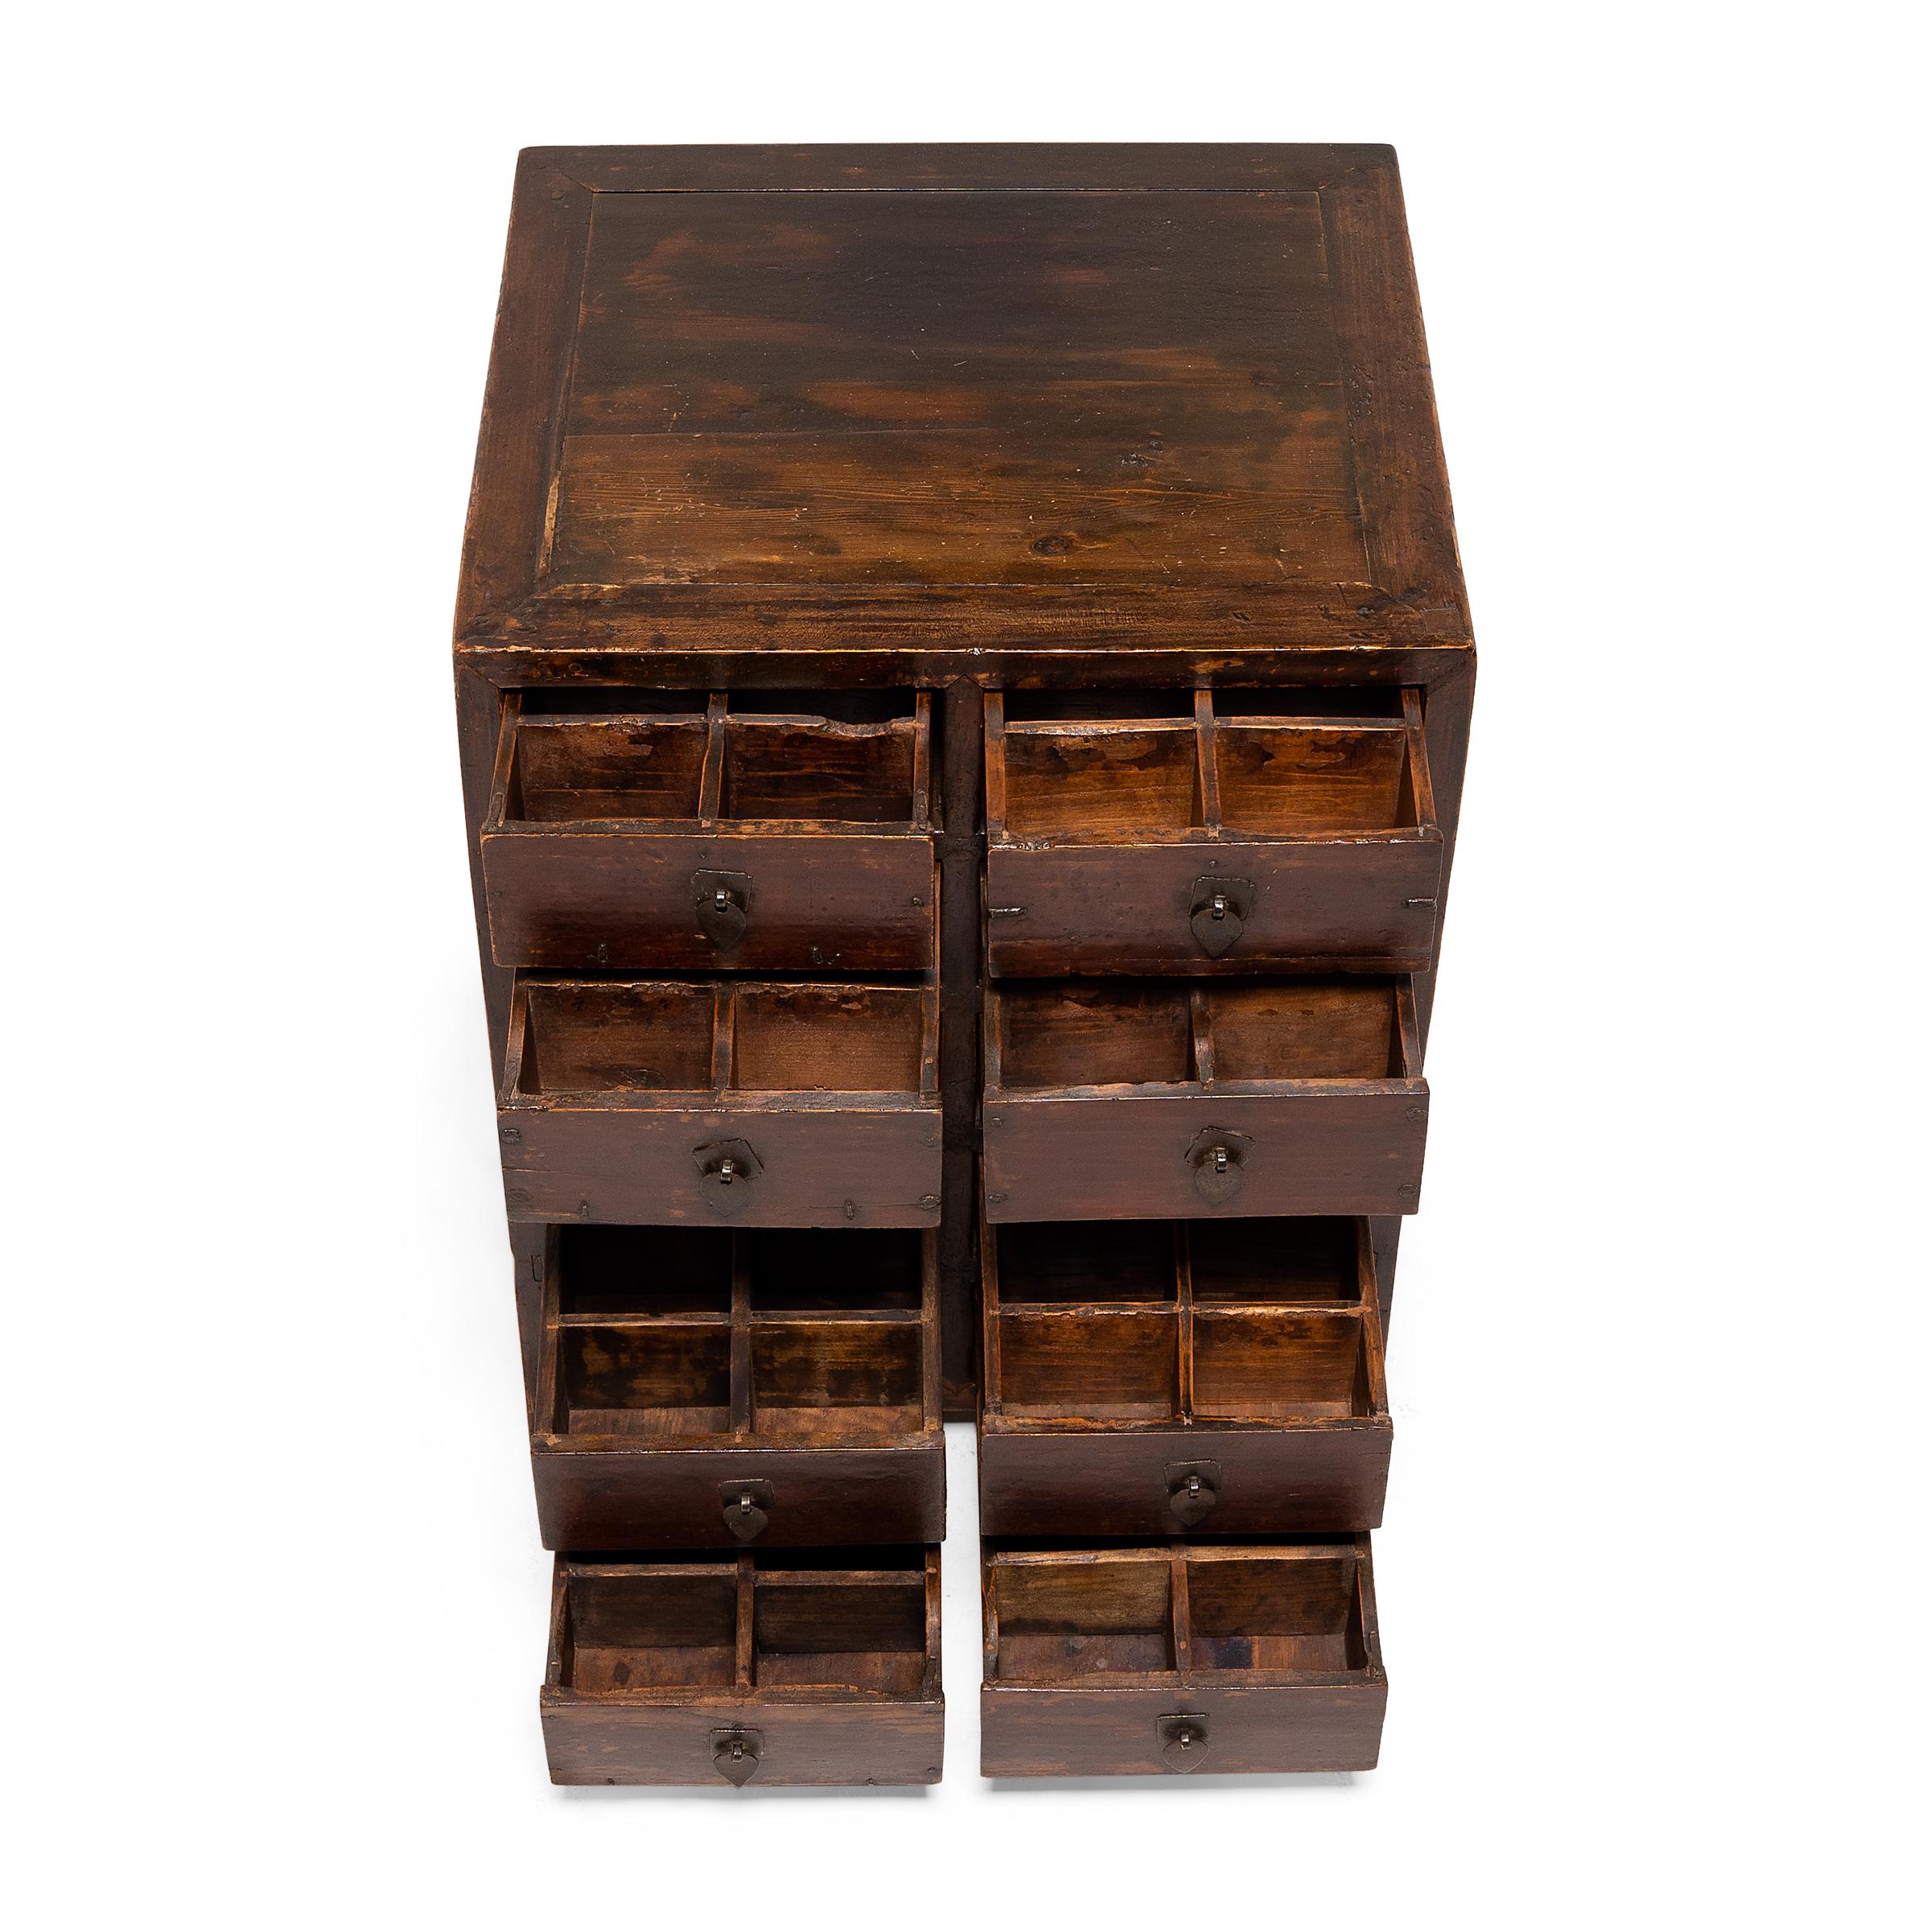 This petite lacquered chest of drawers was originally used in a 19th-century Chinese pharmacy to organize and store herbal medicines. The square-corner cabinet is constructed with ten shallow drawers, each divided into six small interior